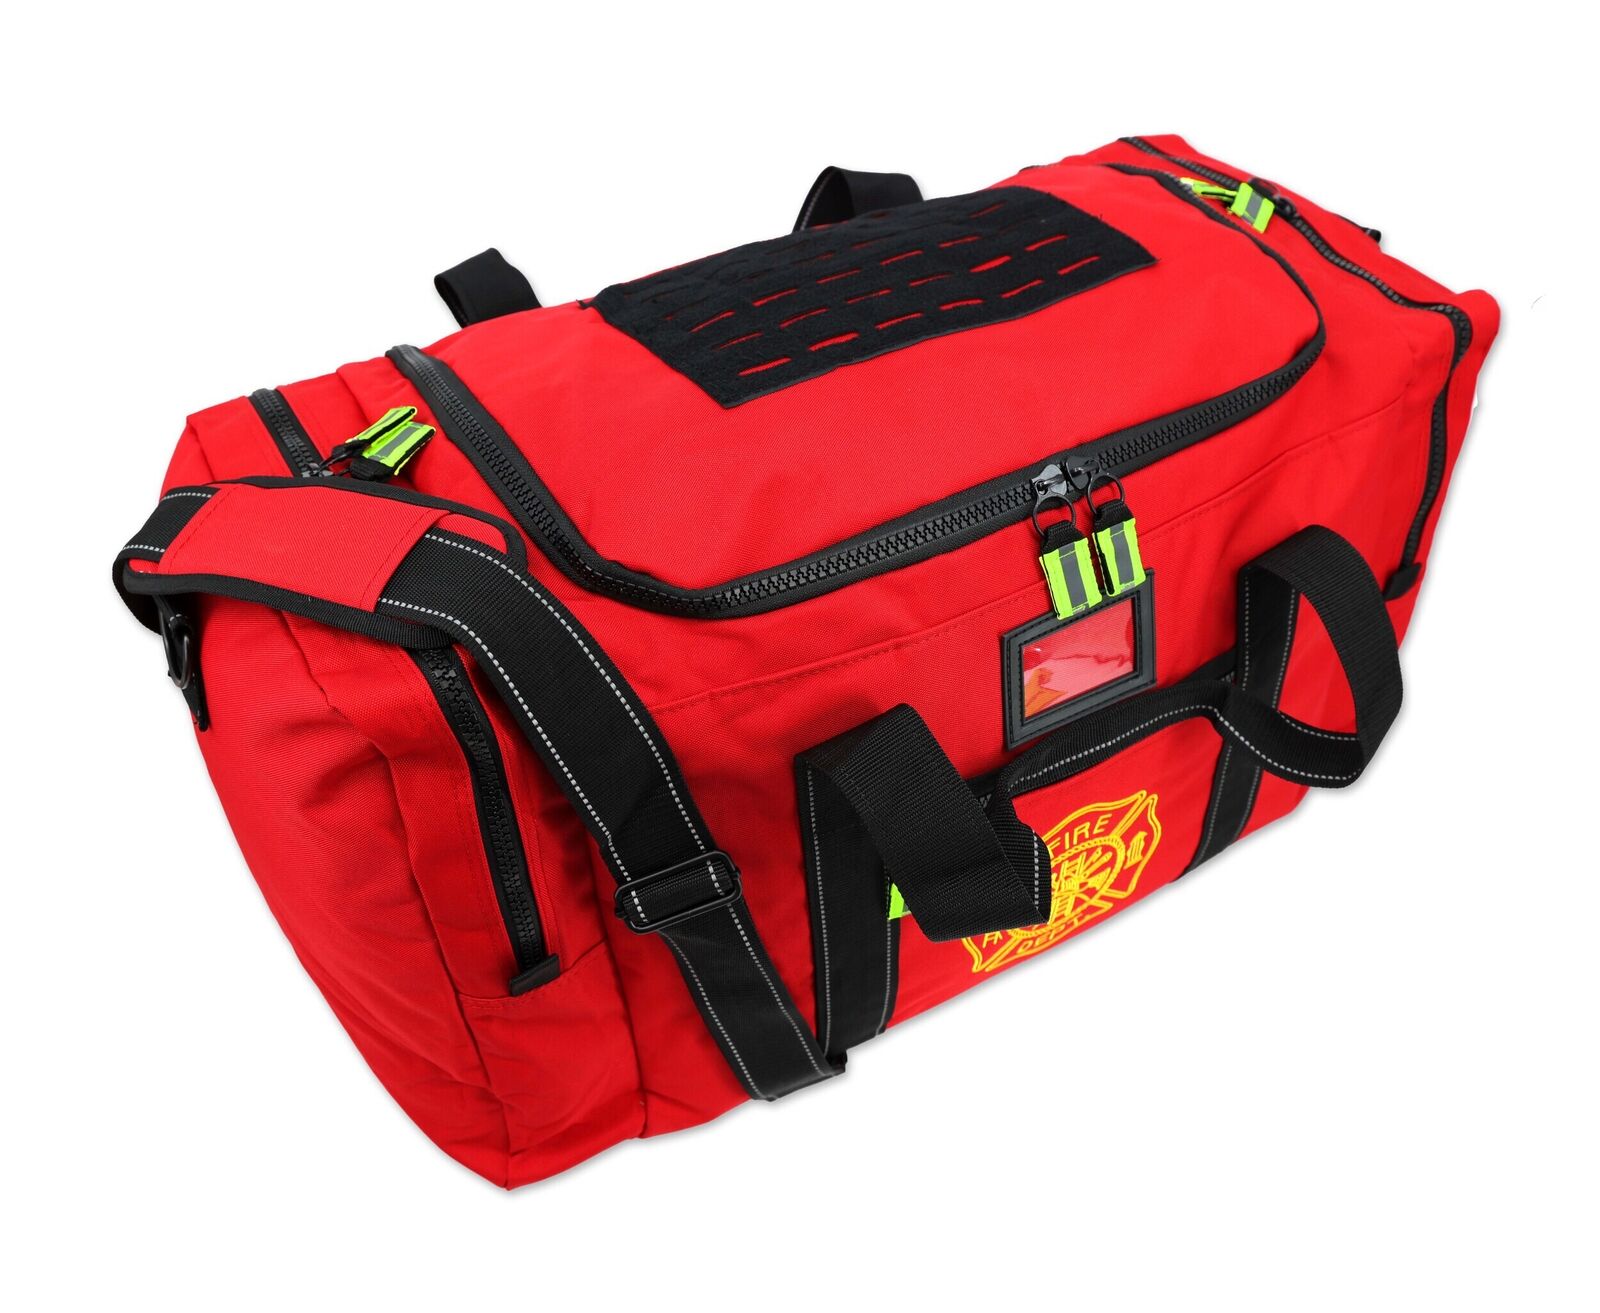 Lightning X Value Firefighter Turnout Gear Bag w/ Maltese Cross Embroidery